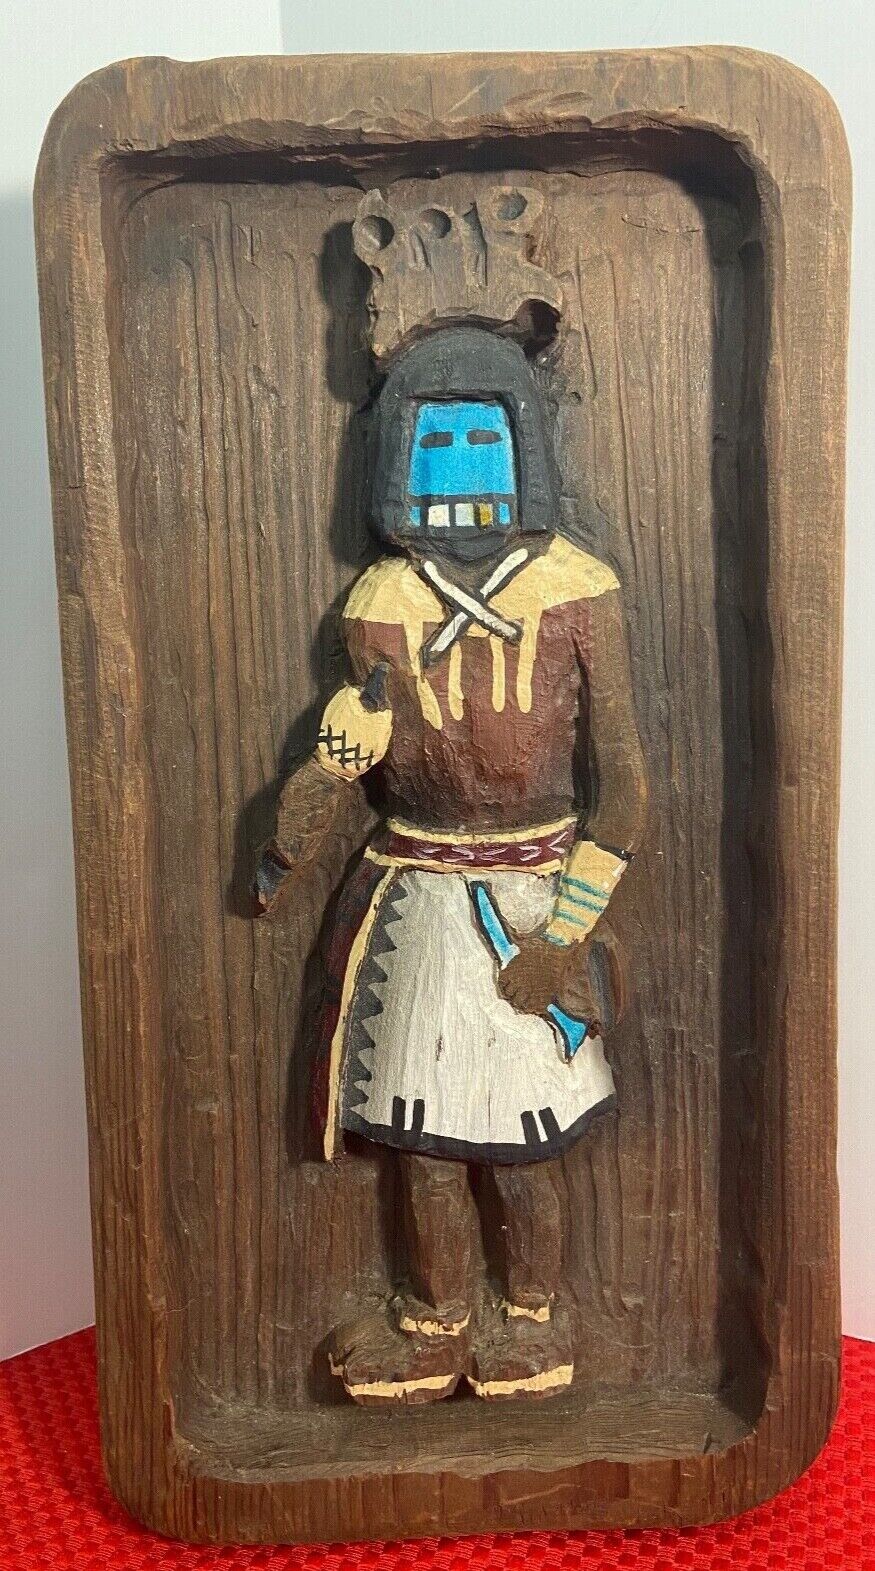 Beautifully Painted Wooden Vtg Hand Carved Kachina Doll Rustic Wall Hanging